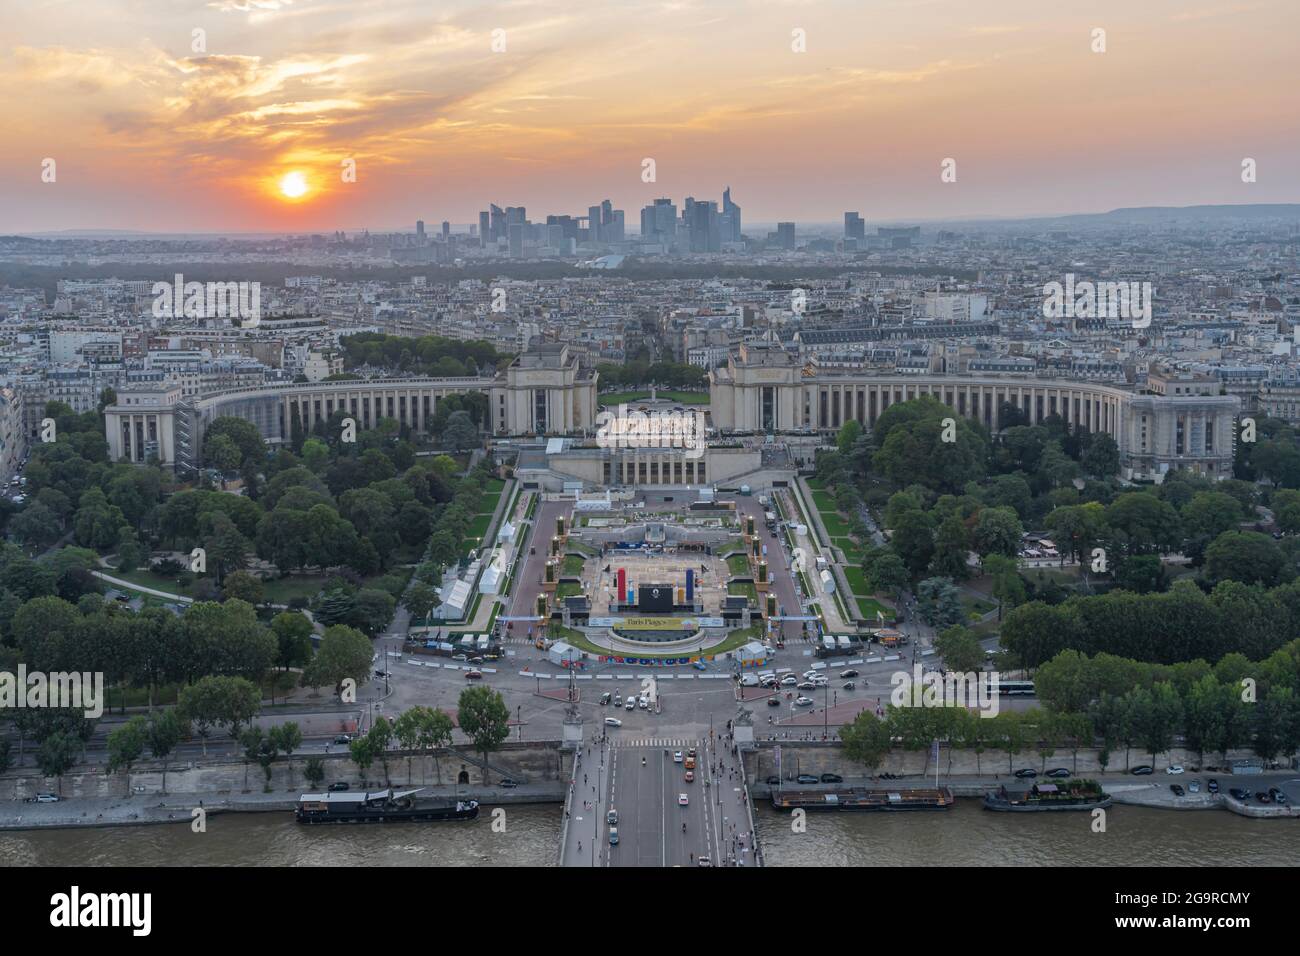 Paris, France - 07 22 2021: Eiffel Tower: View of the Trocadero and la Defense at sunset Stock Photo